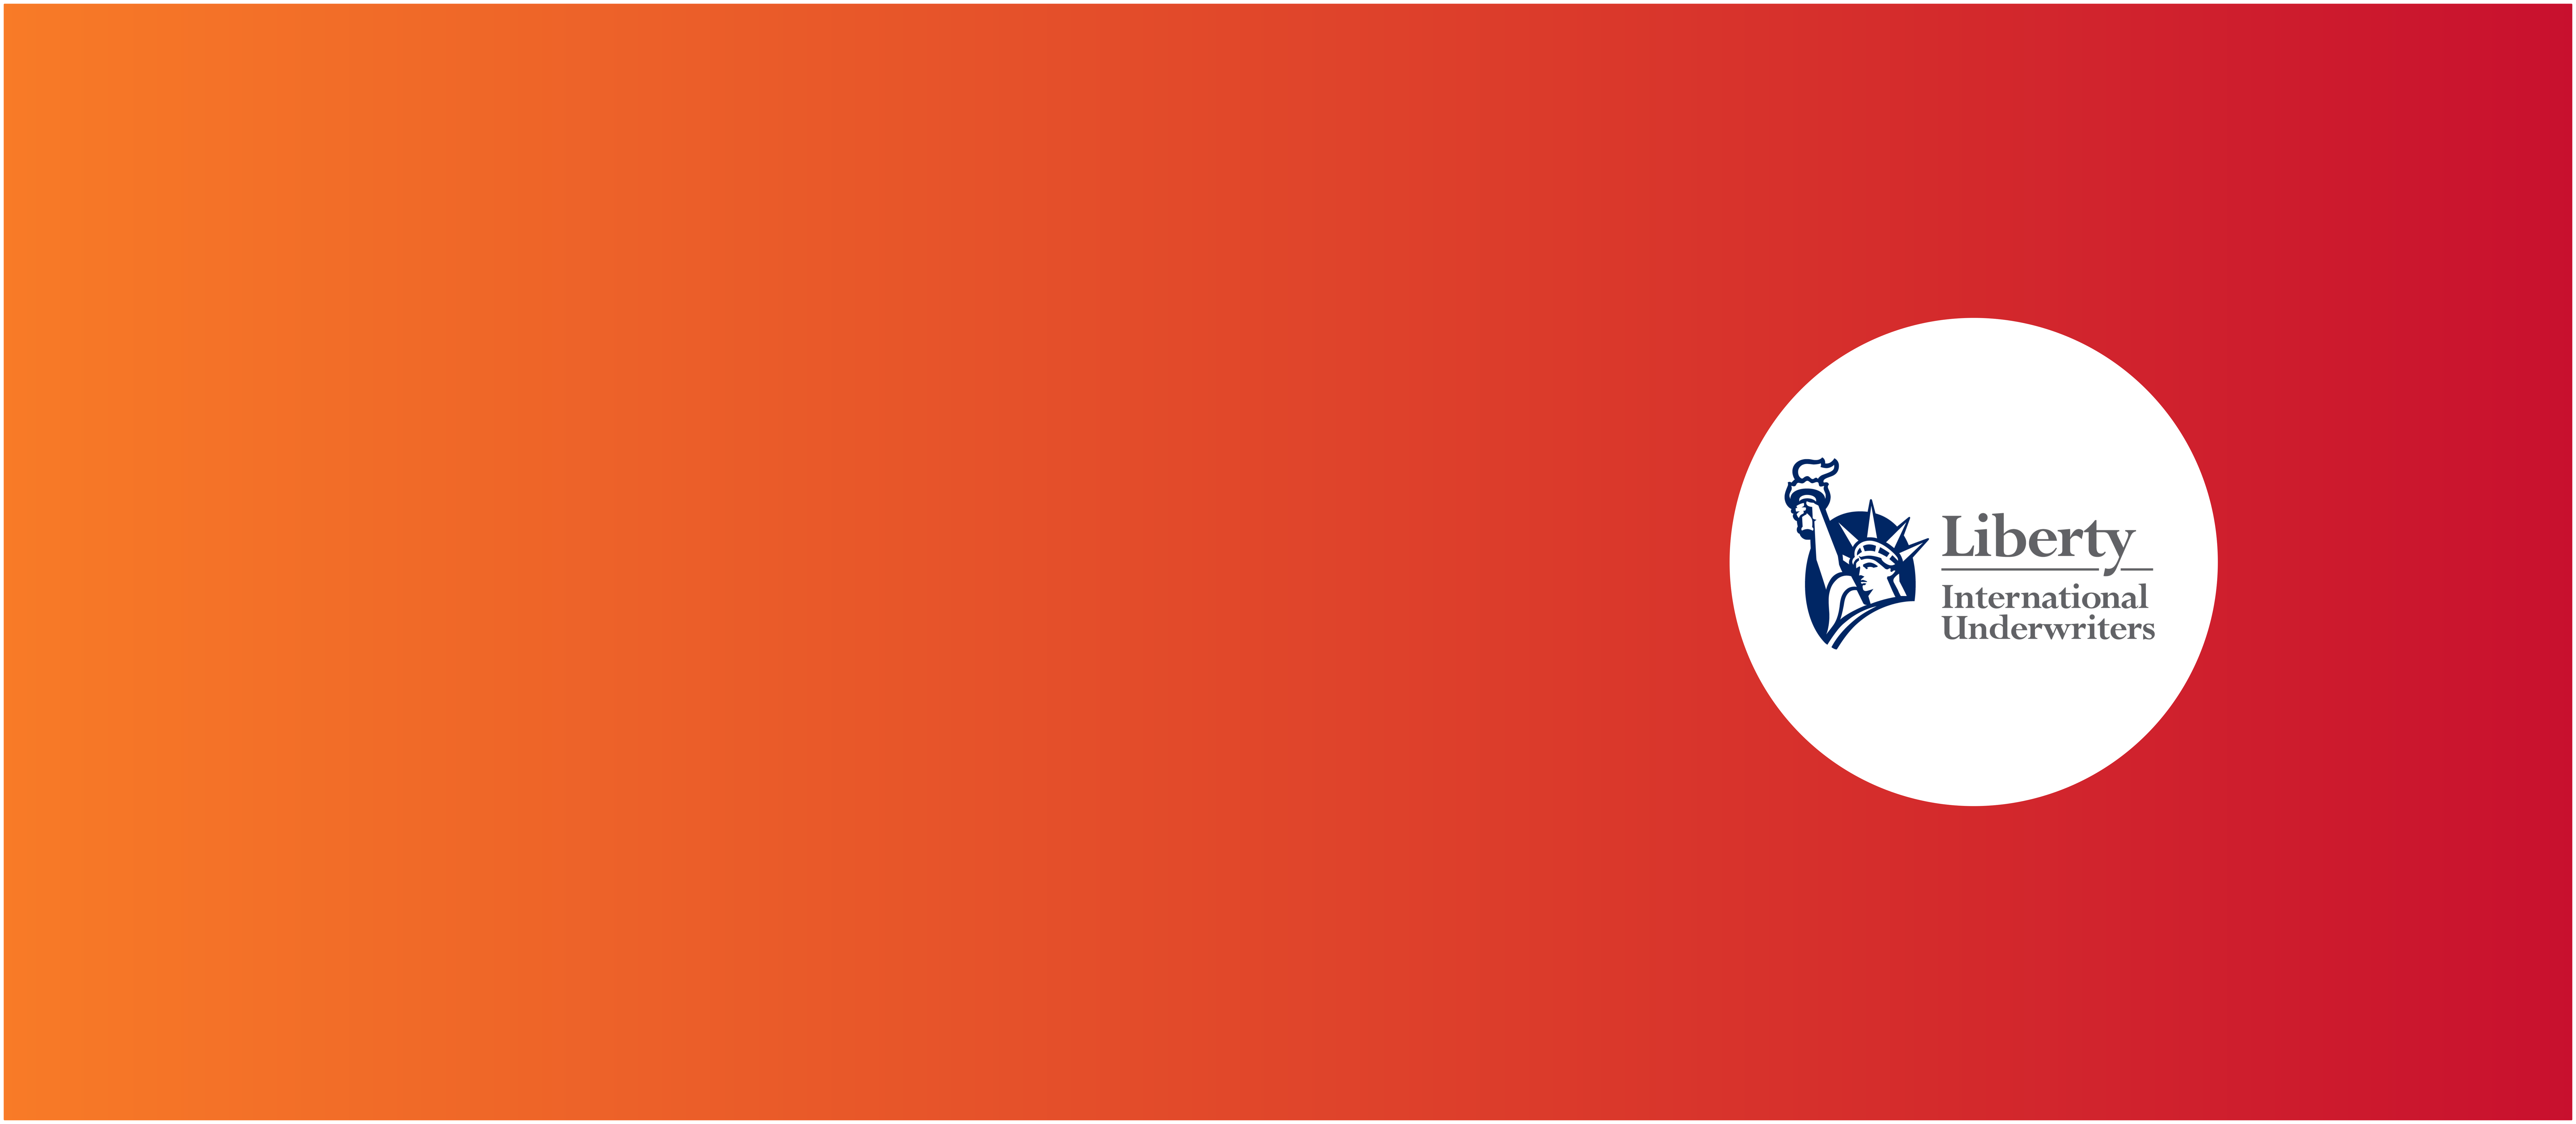 Orange and red background with Liberty International Underwriters logo